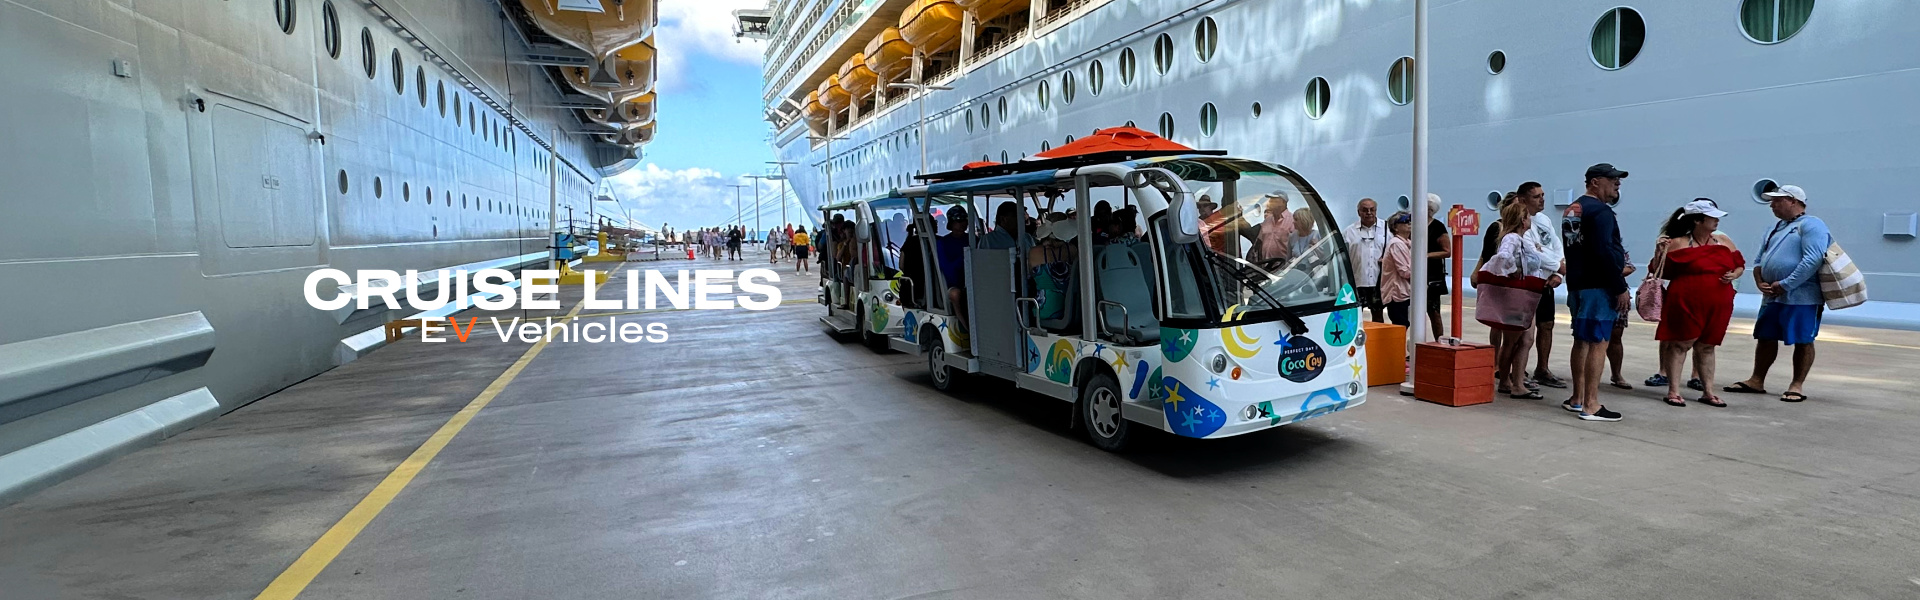 Golf Carts for Cruise Lines